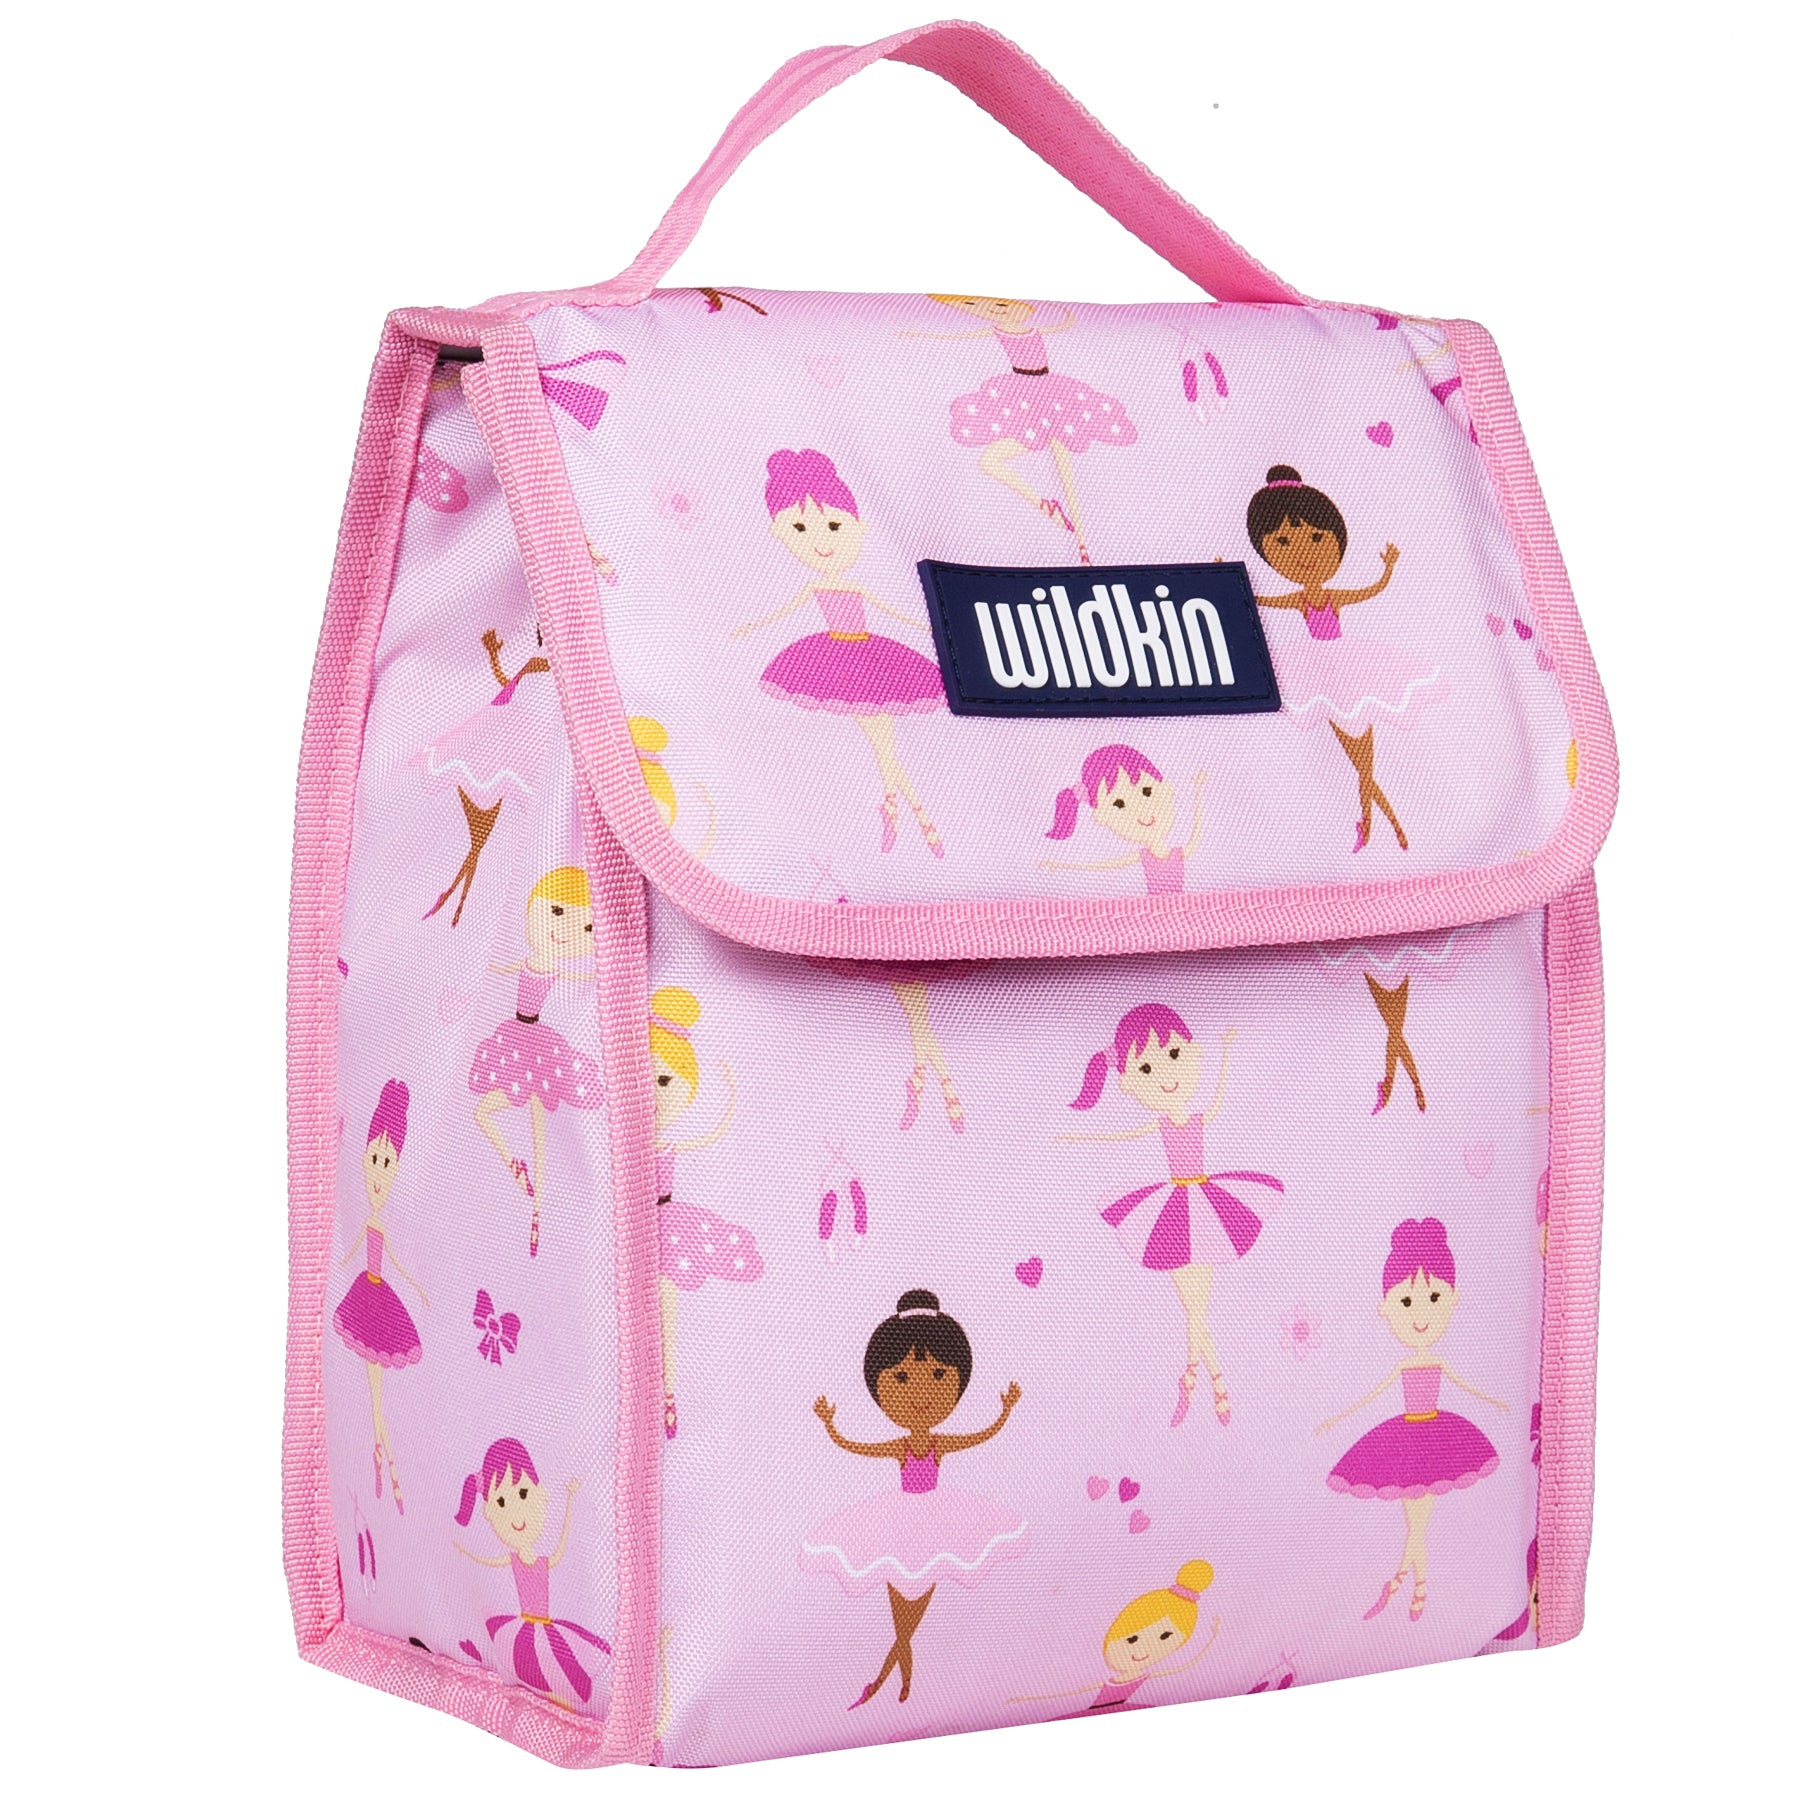 Wildkin Insulated Lunch Bag, Kids Lunch Bags